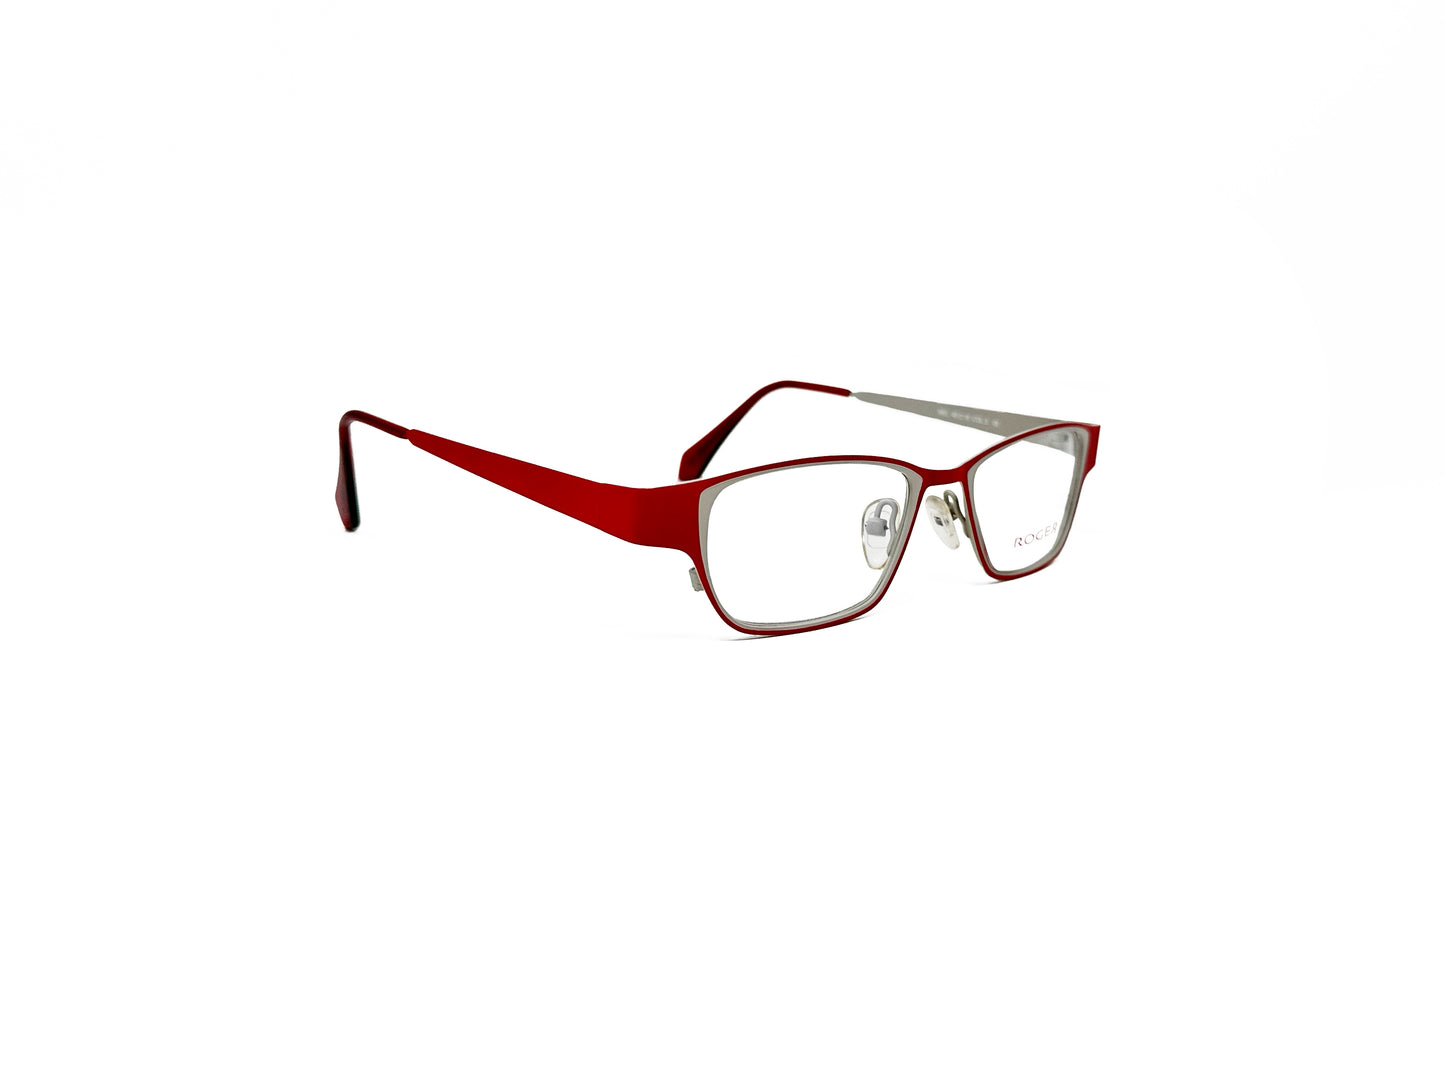 Roger rectangular, metal optical frame. Model: Mel. Color: 3 - Red and white. Side view.